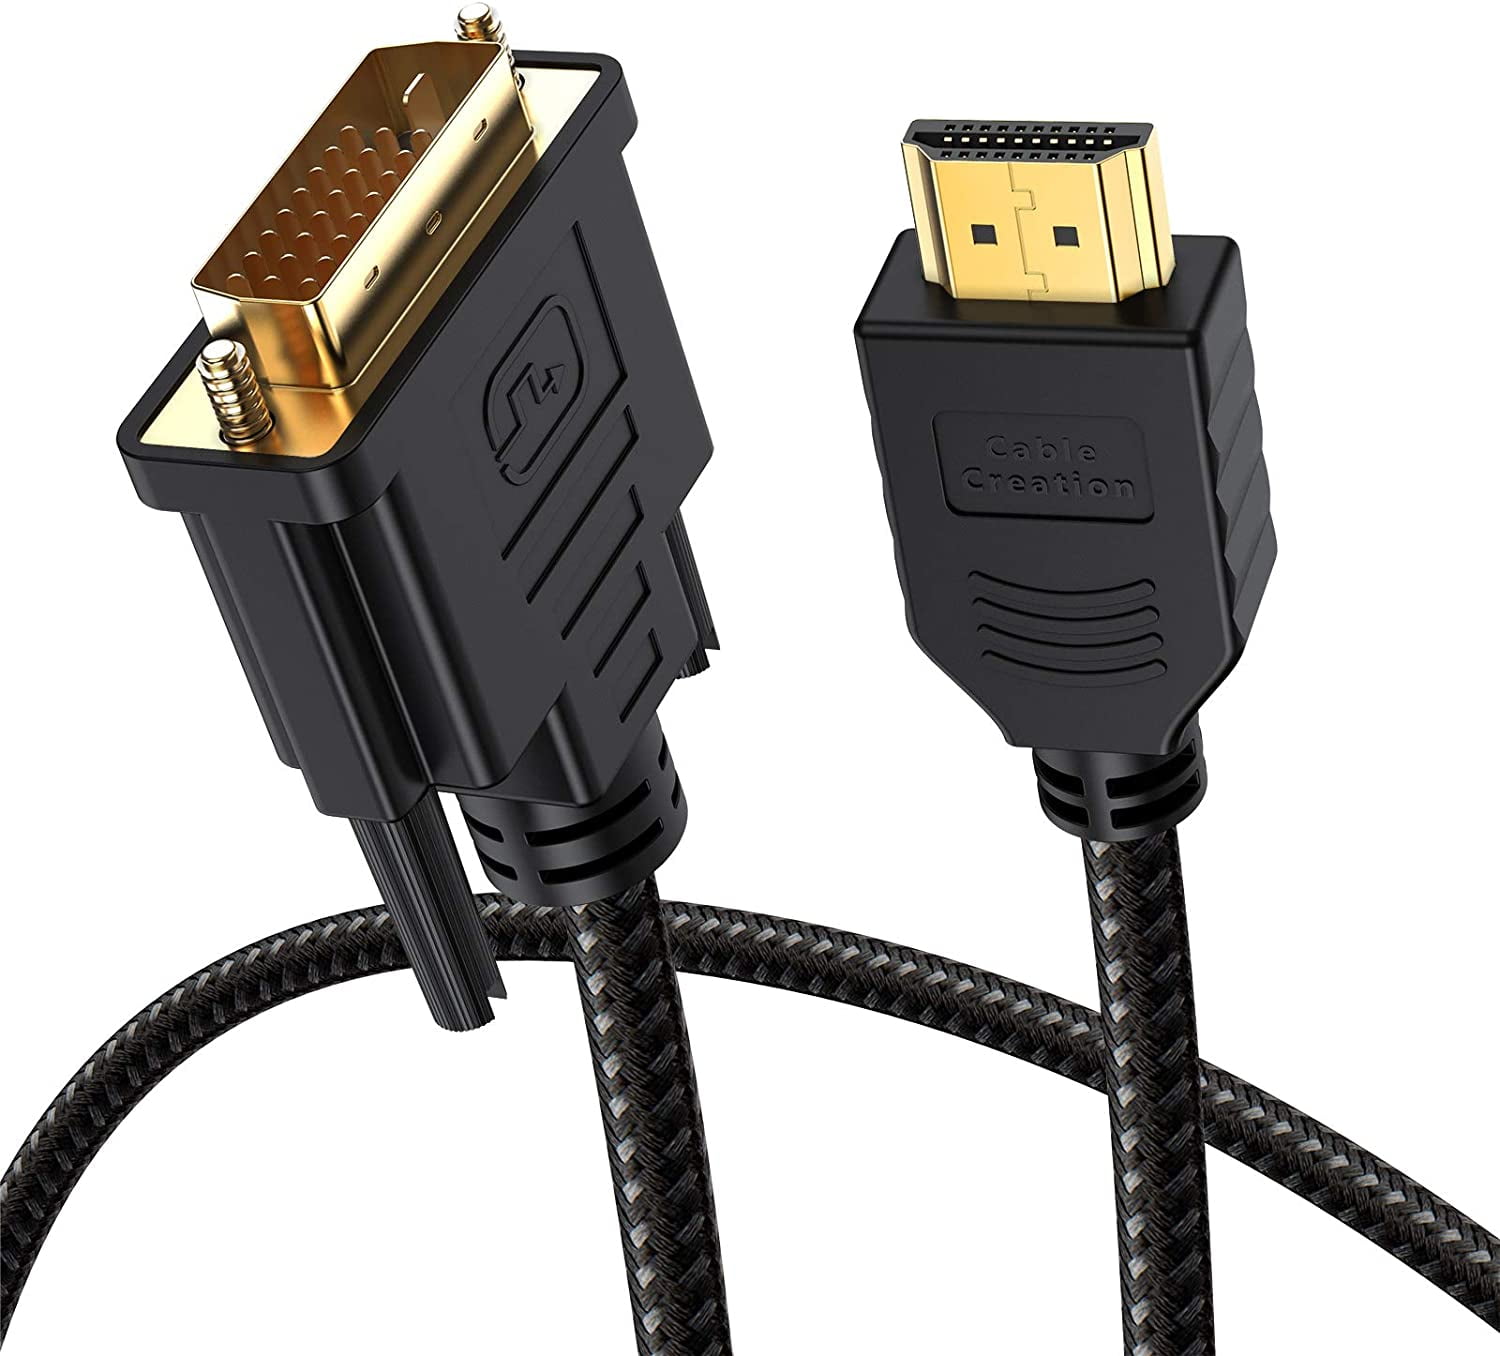 StarTech.com 6ft HDMI to DVI D Adapter Cable - Bi-Directional - HDMI to DVI  or DVI to HDMI Adapter for Your Computer Monitor (HDMIDVIMM6),Black - Buy